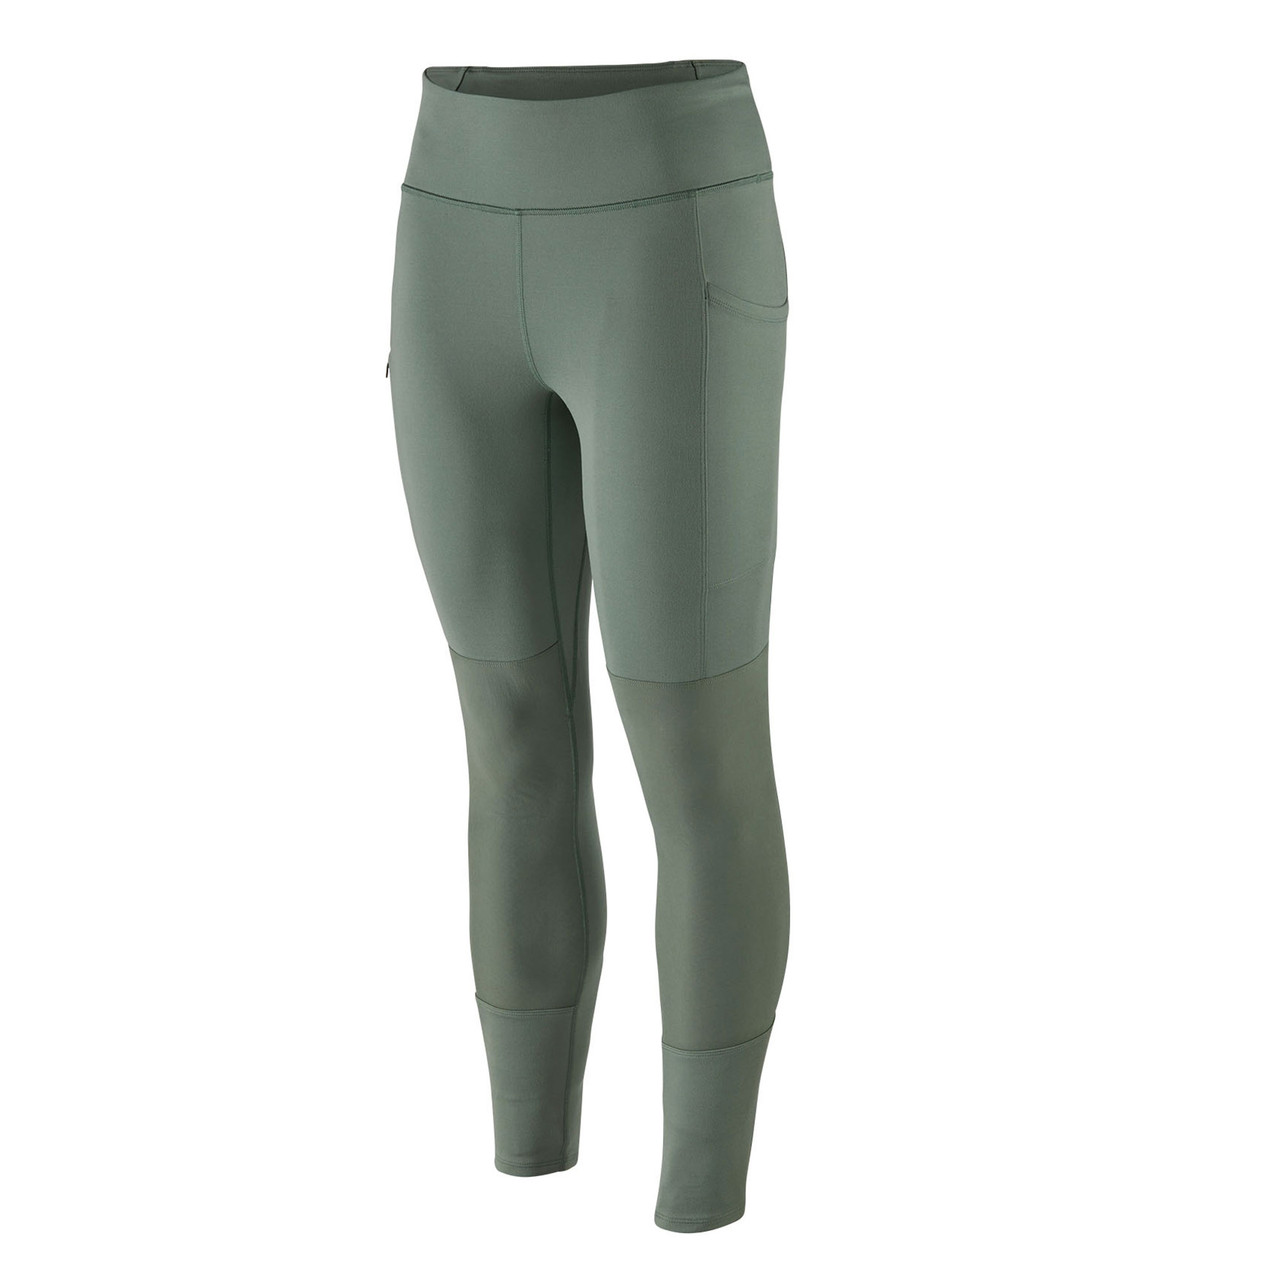 Patagonia Womens Pack Out Hike Tights, UK